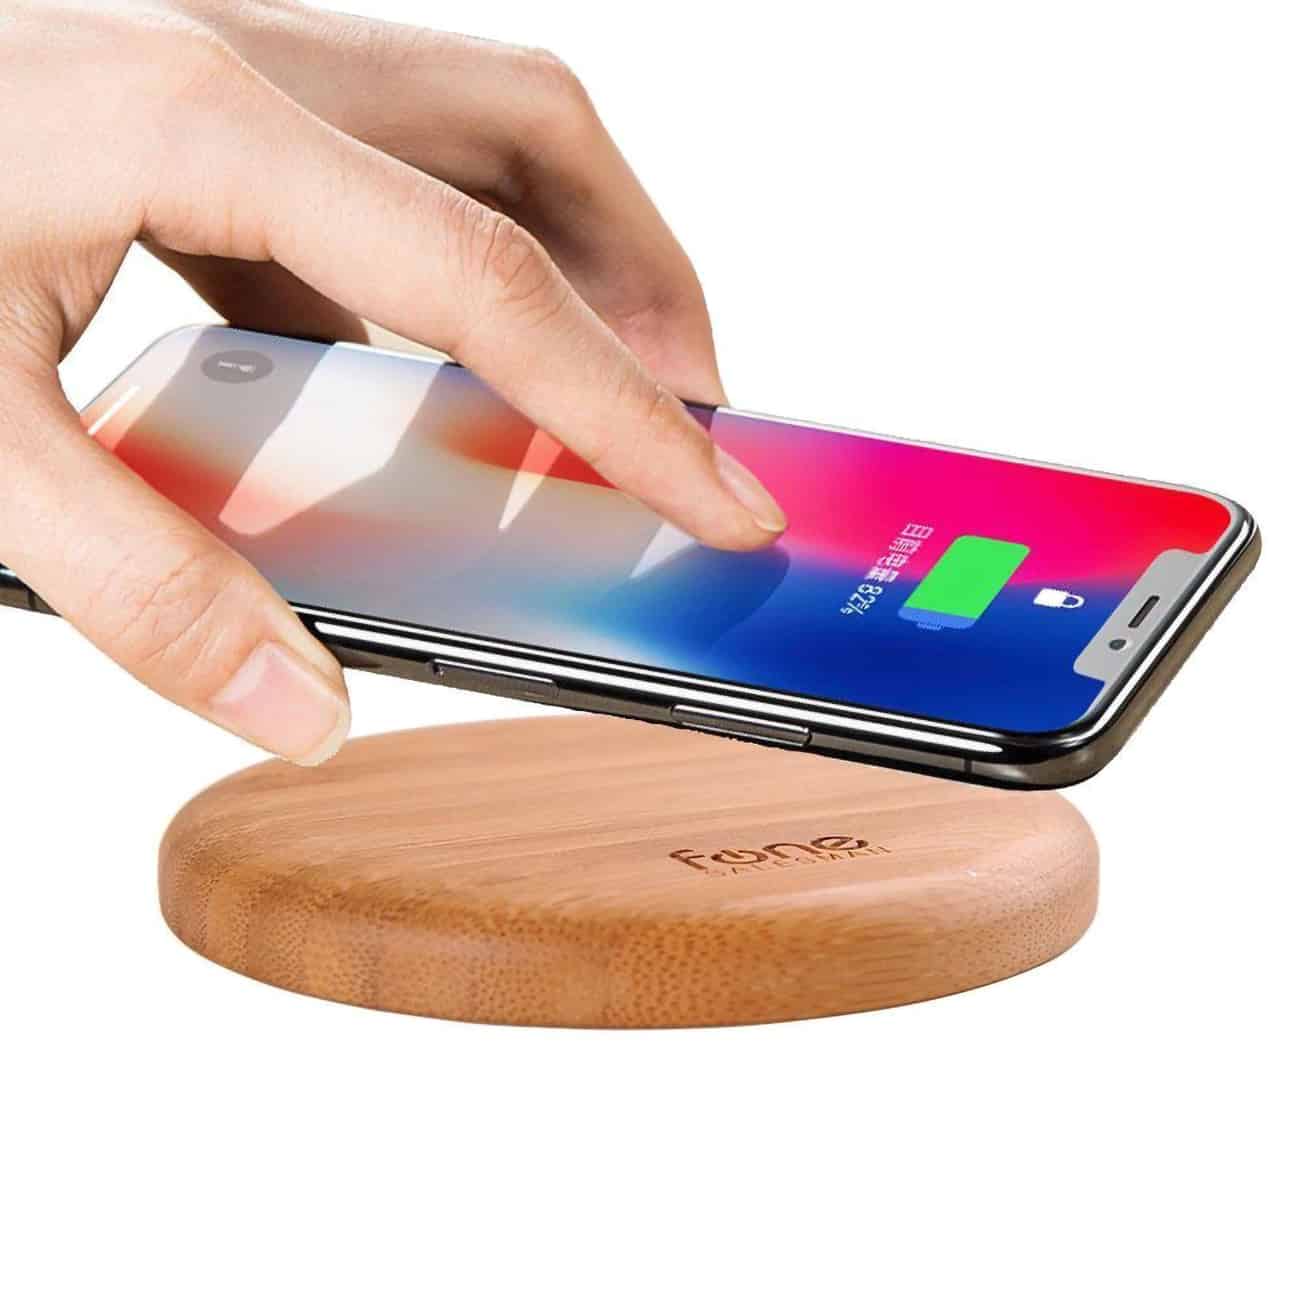 WoodPuck, a bamboo charger, makes a great addition to your home.